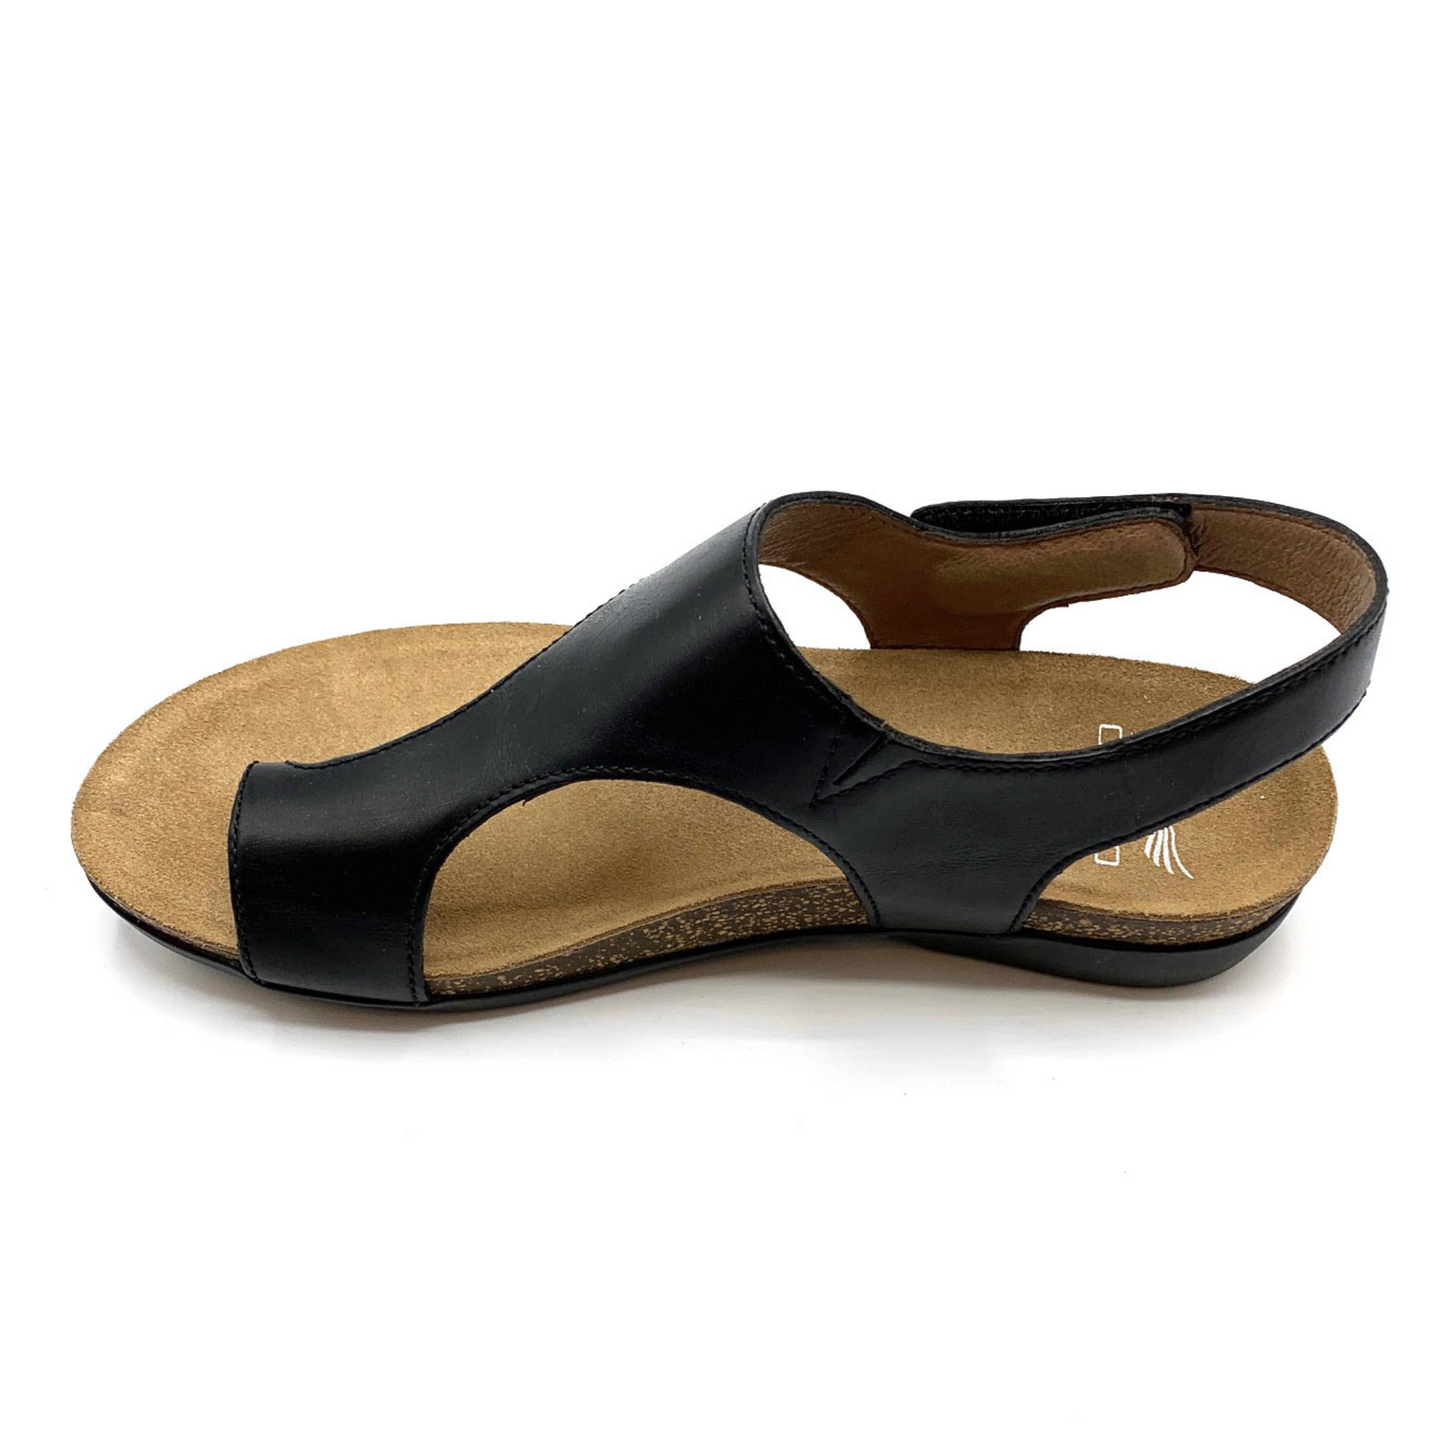 A left angle view of a leather sandal with a brown footbed, black upper strap and toe loop, and velcro adjustable back strap.